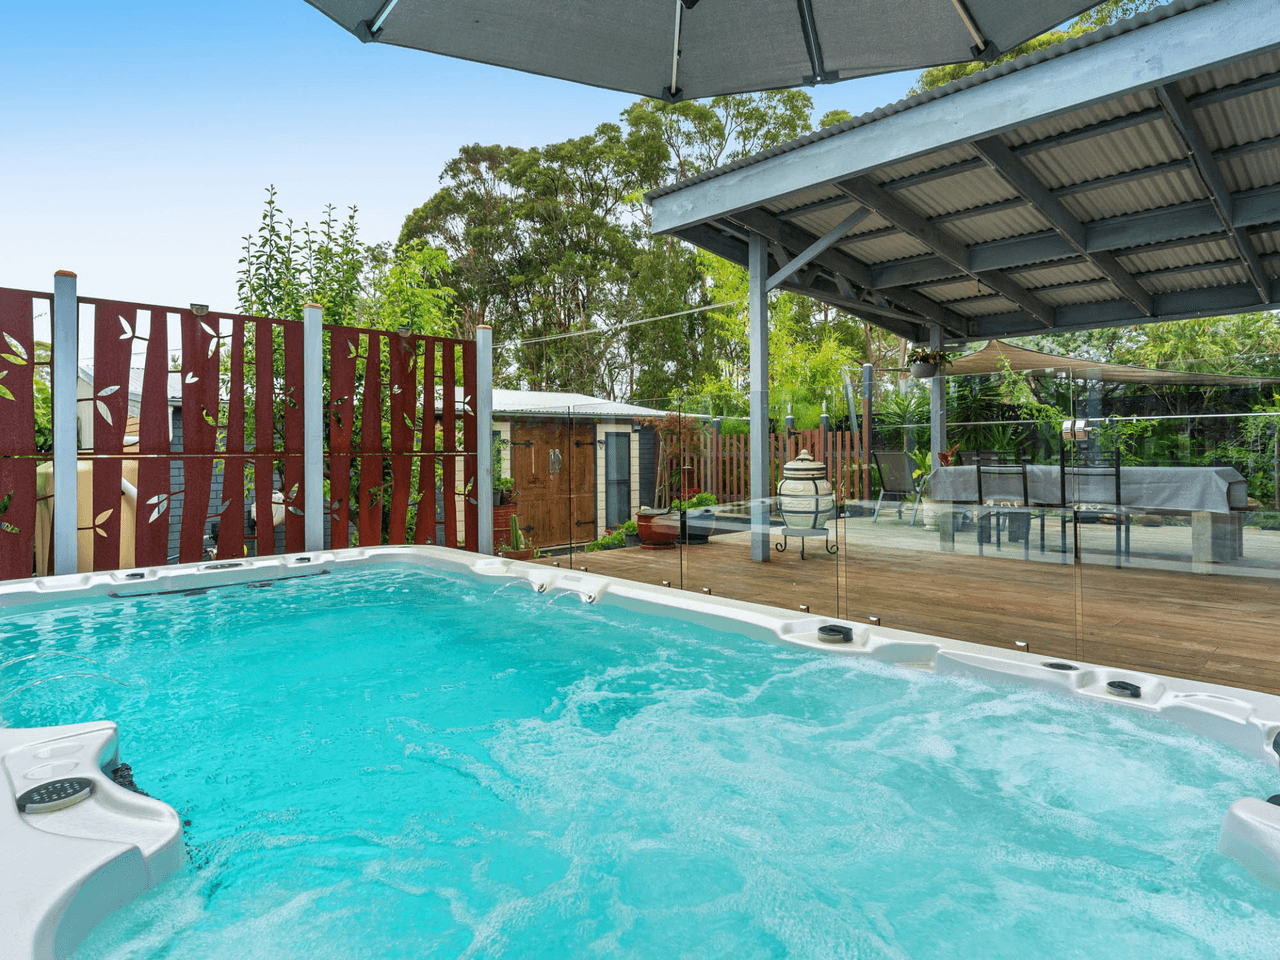 2 Bailey Street, BRIGHTWATERS, NSW 2264